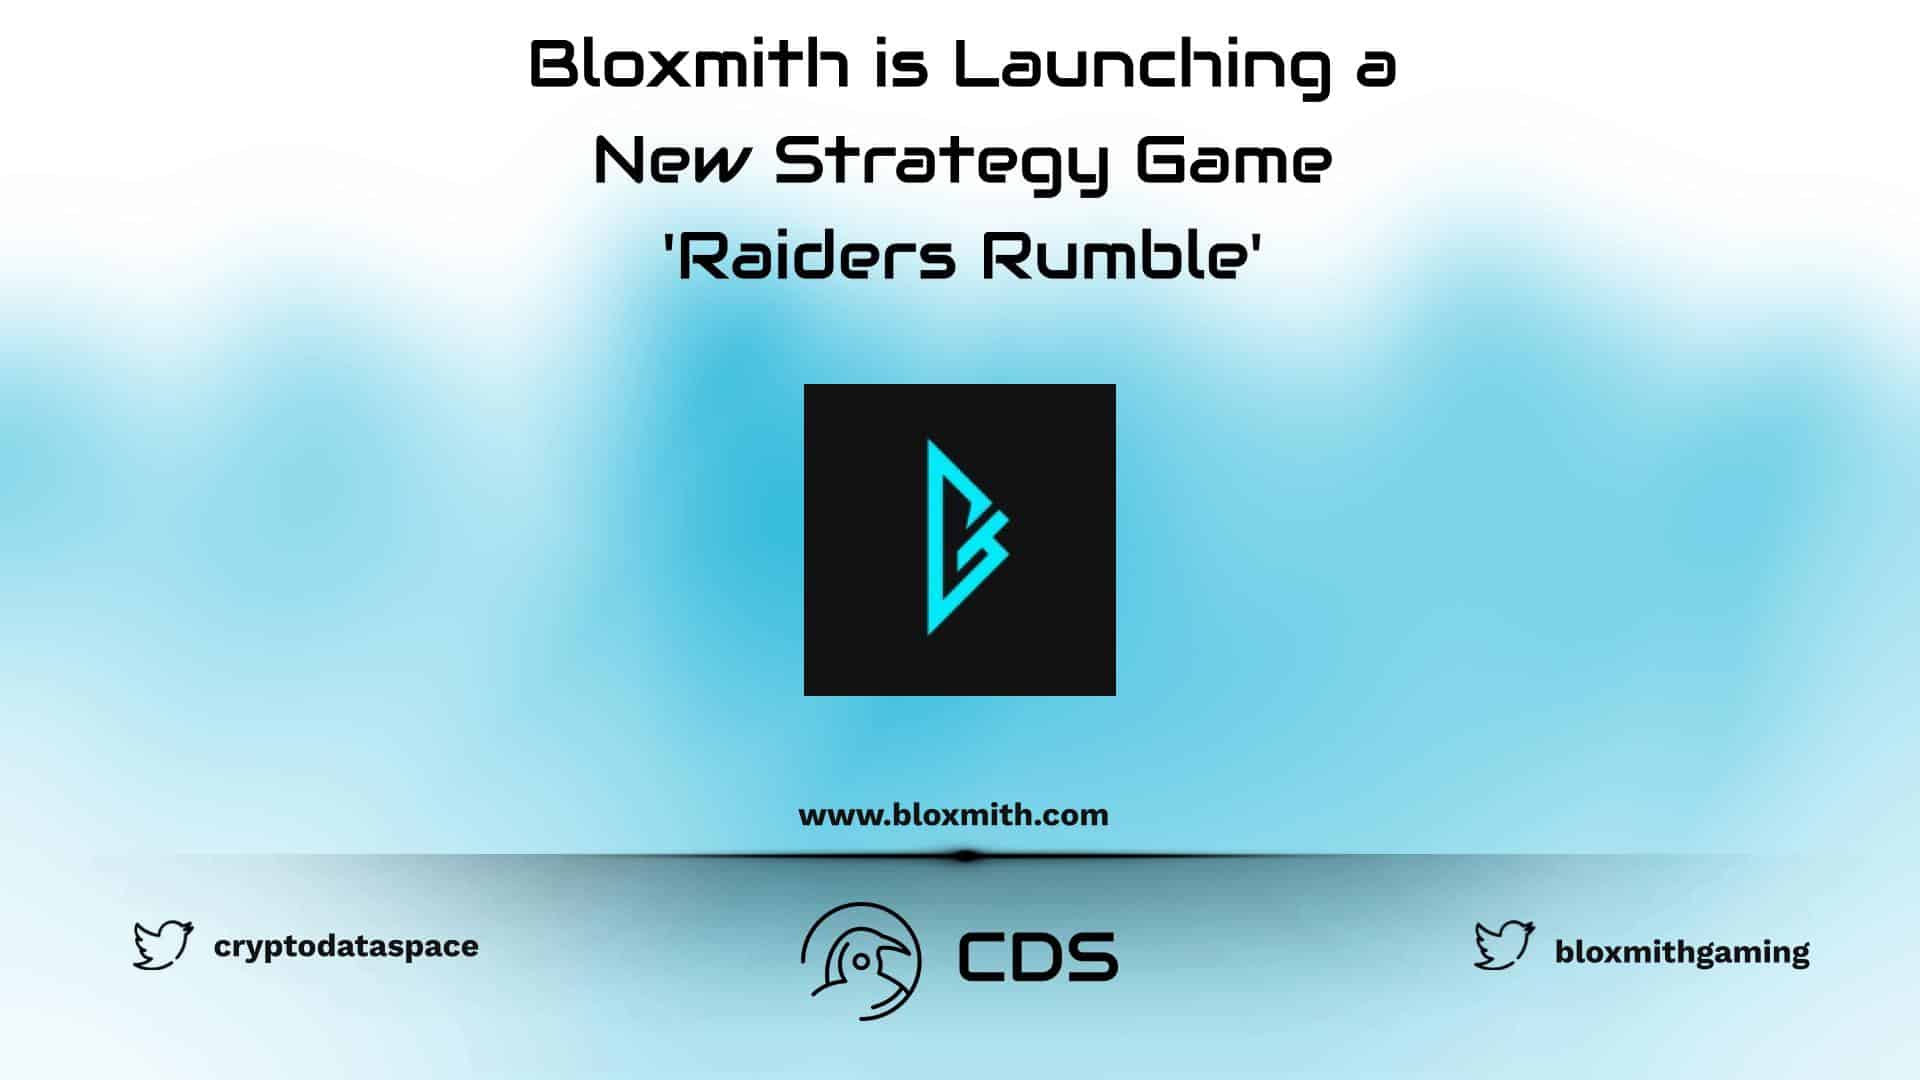 Bloxmith is Launching a New Strategy Game 'Raiders Rumble'